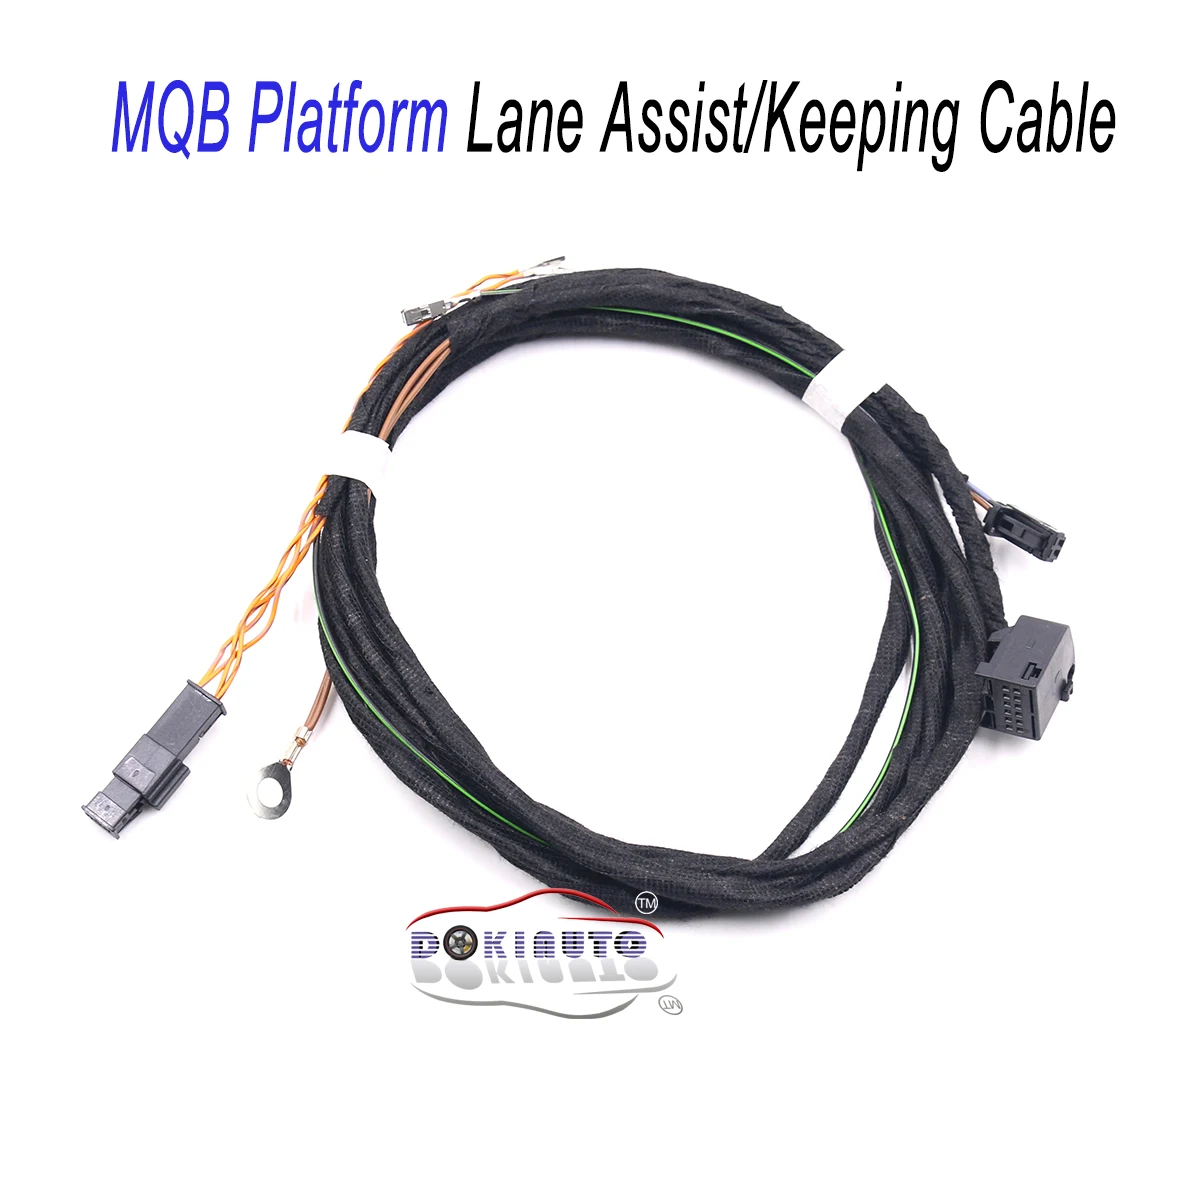 Lane assist Lane keeping system Wire/cable/Harness For VW Golf 7 MK7 Passat B8 MQB CARS